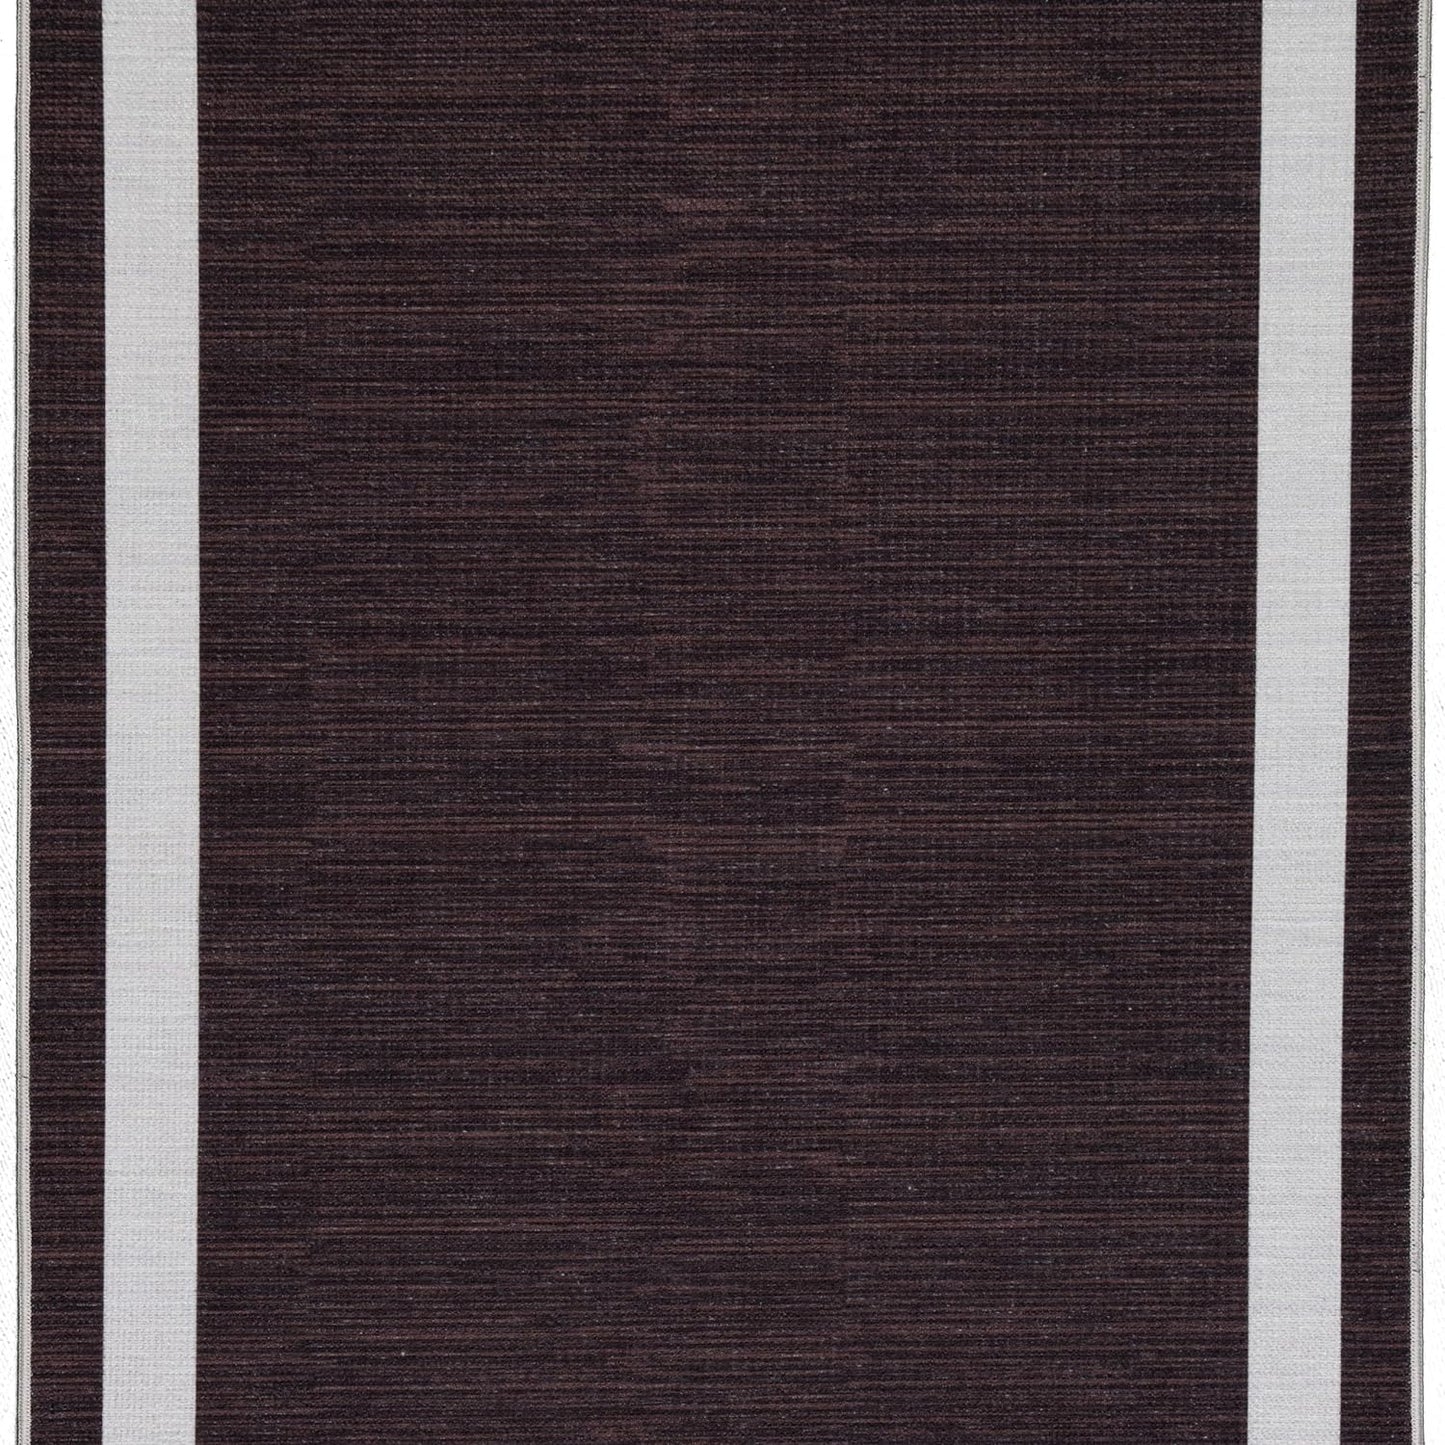 Playa Rug Machine Washable Area Rug With Non Slip Backing - Stain Resistant - Eco Friendly - Family and Pet Friendly - Everest Geometric Modern Bordered Brown&Creme Design